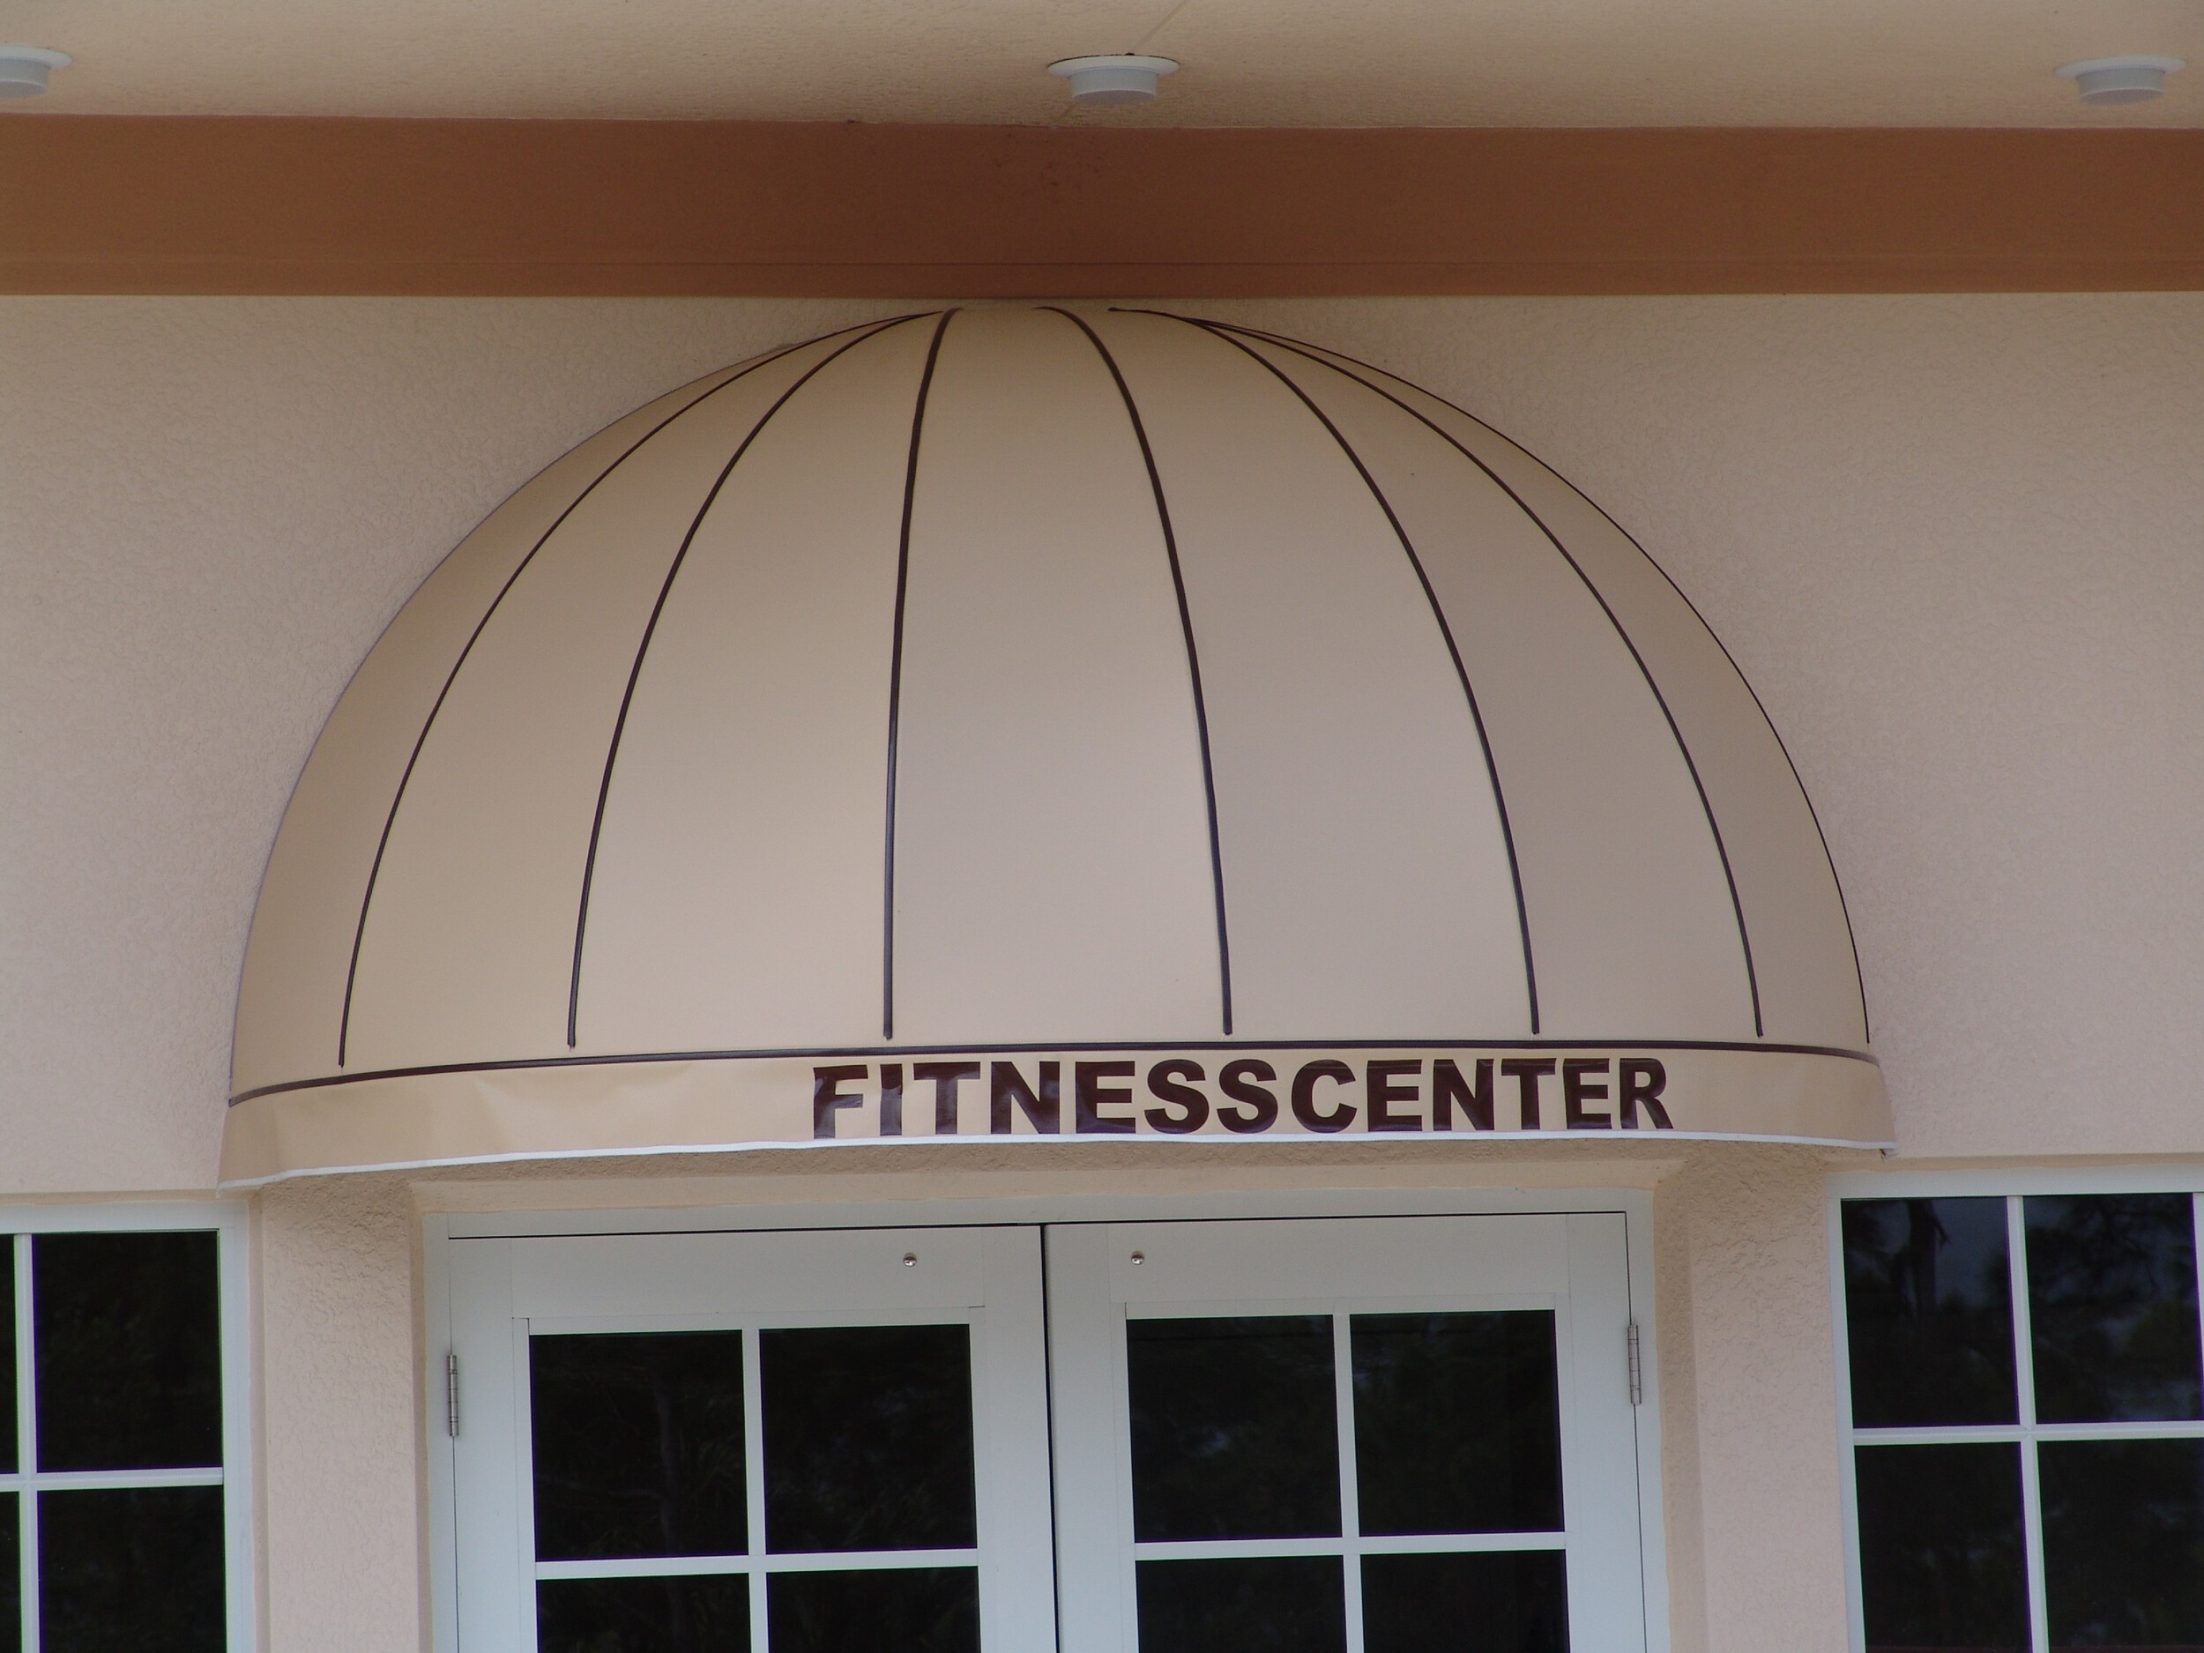 Fitness Center Awning